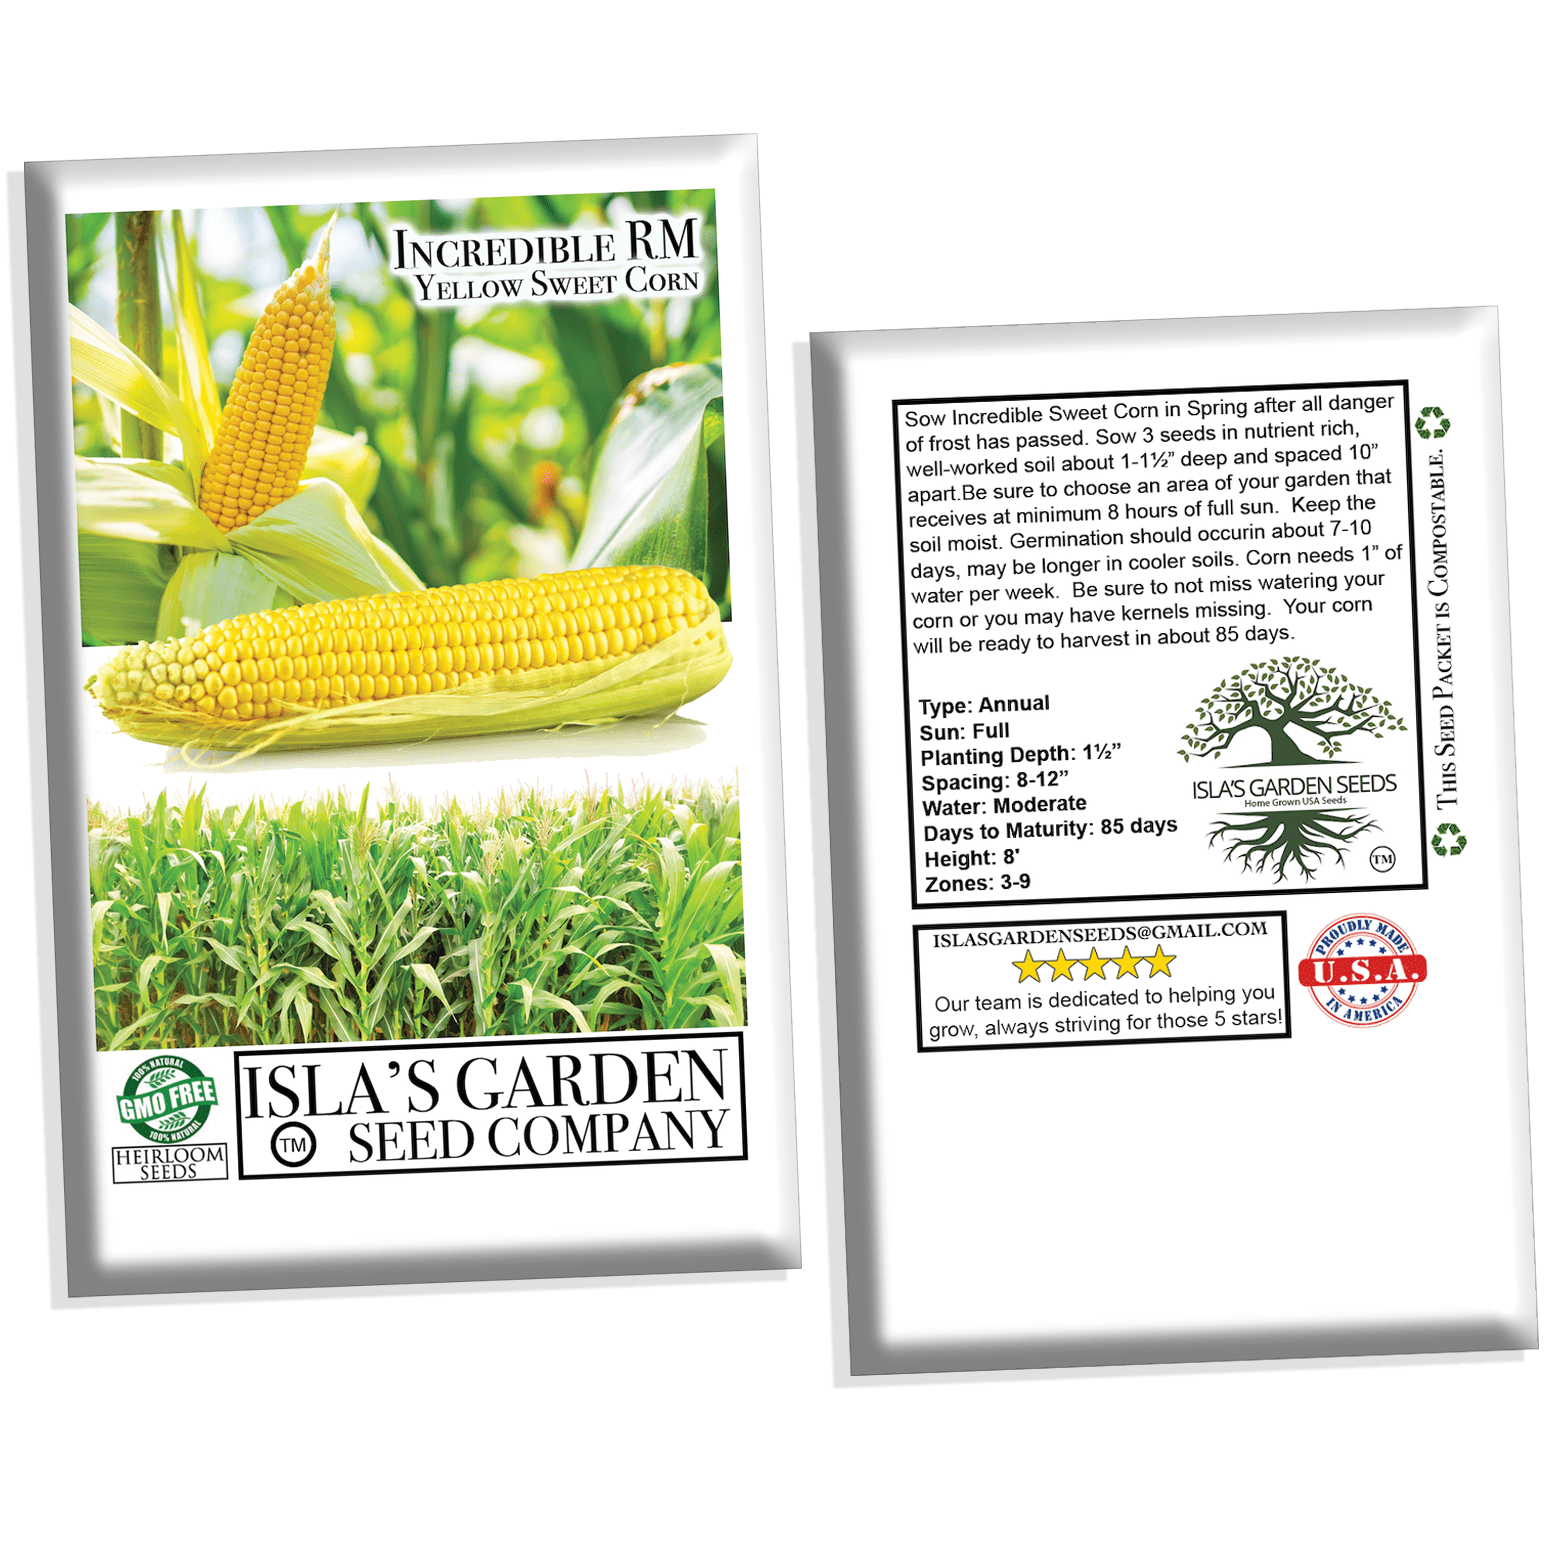 Incredible Sweet Yellow Corn, 75+ Heirloom Seeds Per Packet, Non GMO Seeds, Botanical Name: Zea Mays